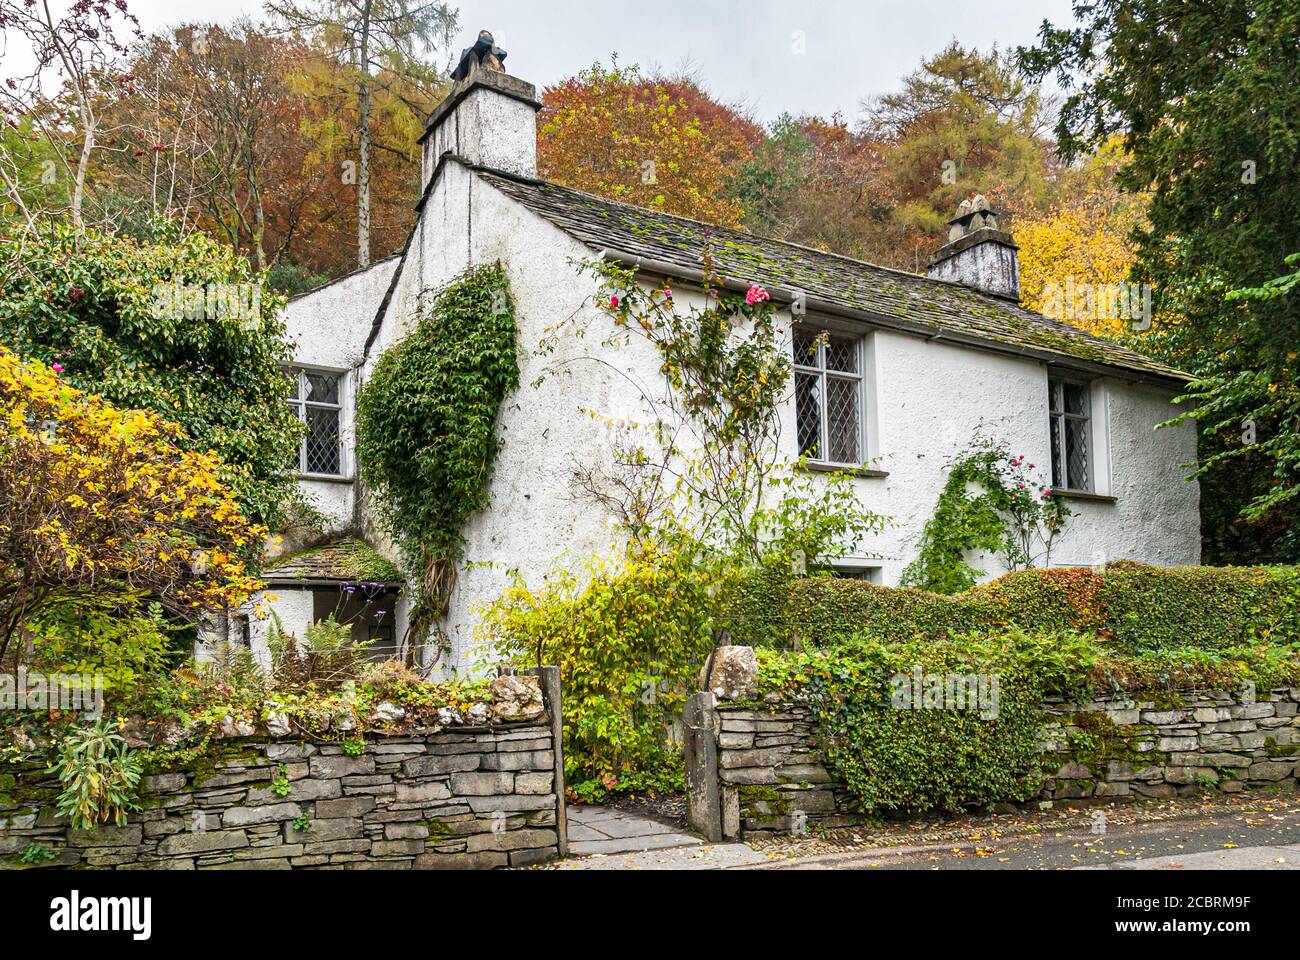 Dove Cottage in Grasmere in the English Lake District. Once home to the poet William Wordsworth and his wife Mary.. Stock Photo